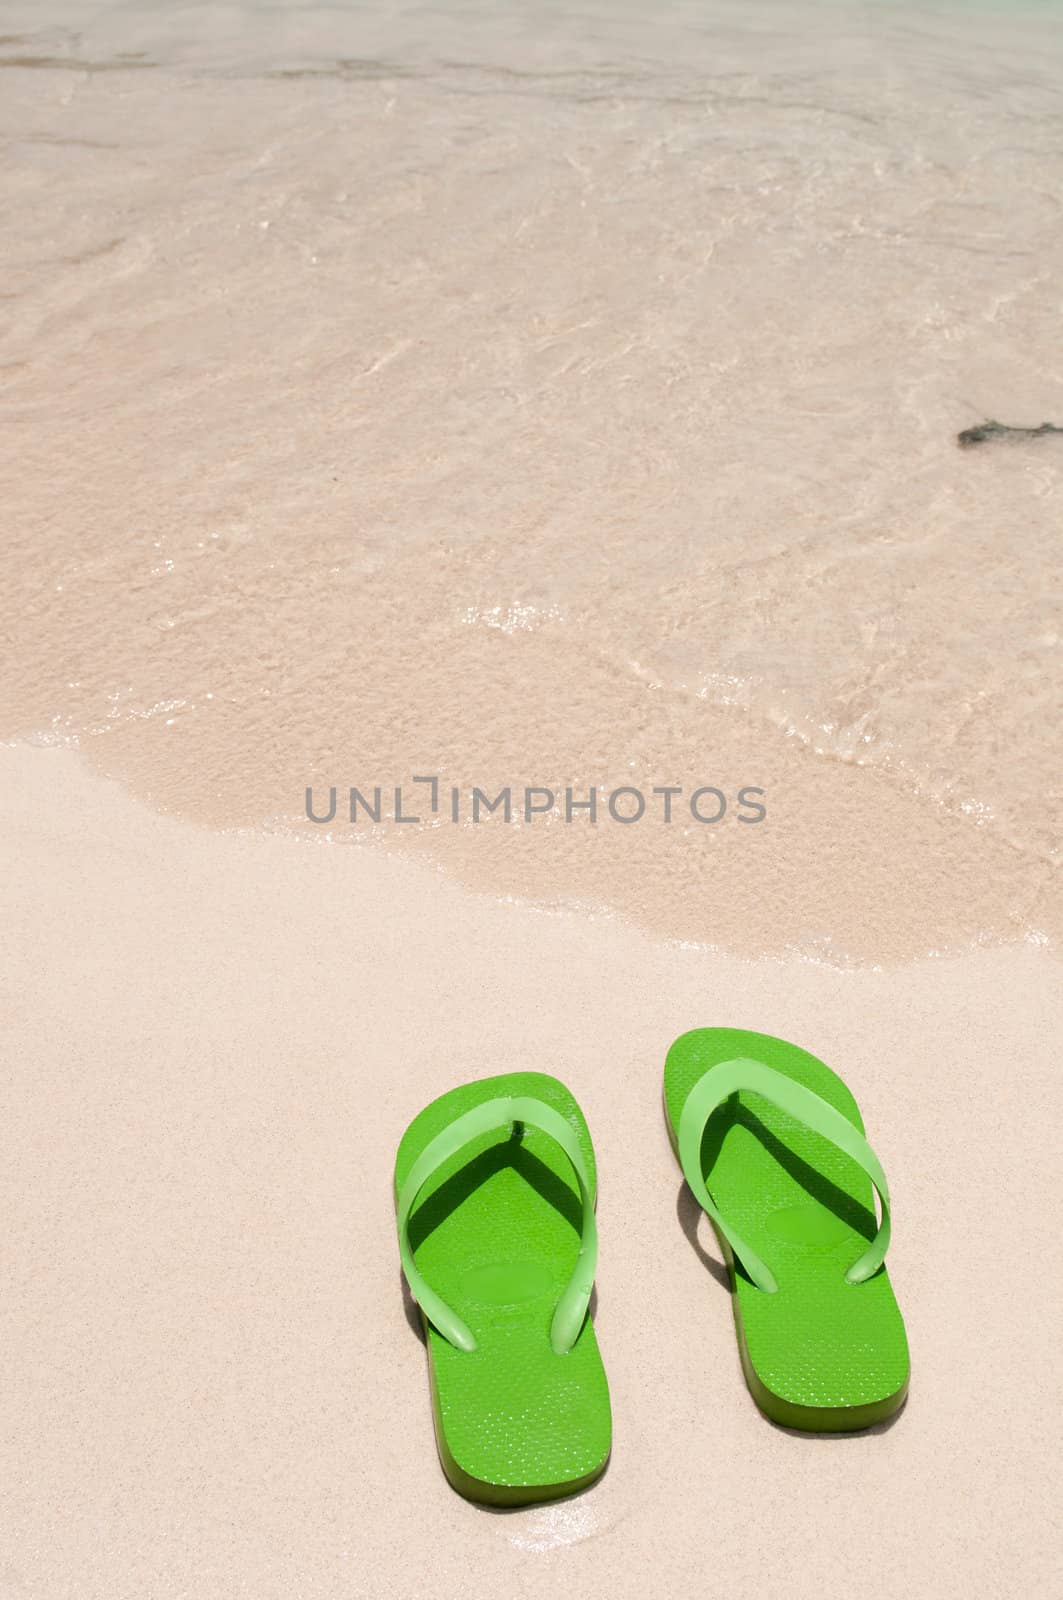 green flip flops on the beach (copy-space available)